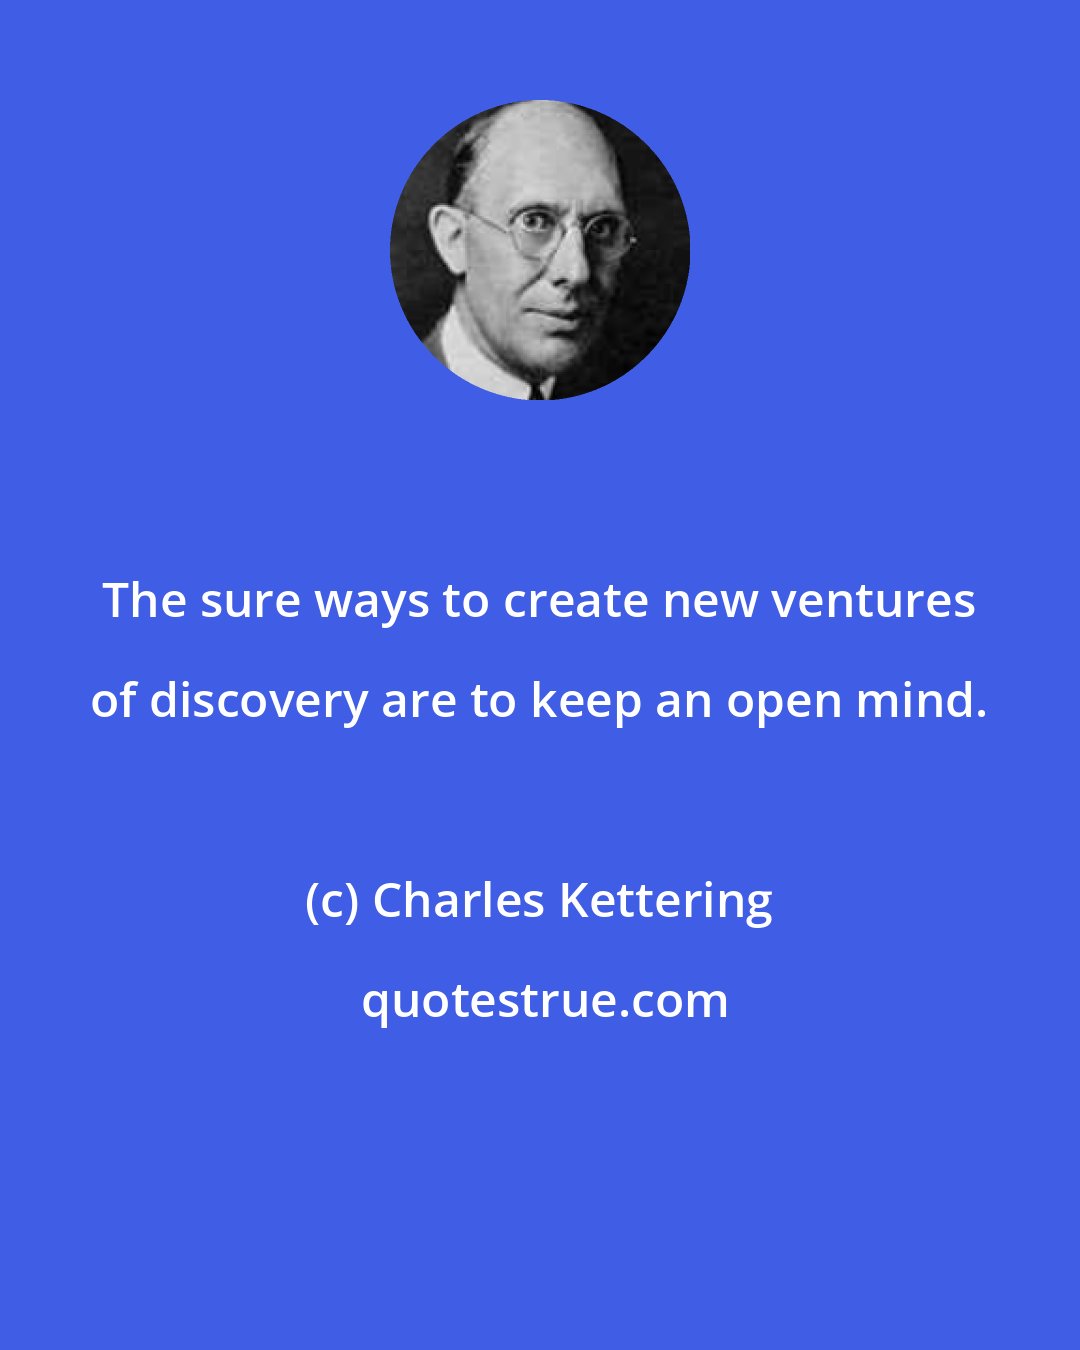 Charles Kettering: The sure ways to create new ventures of discovery are to keep an open mind.